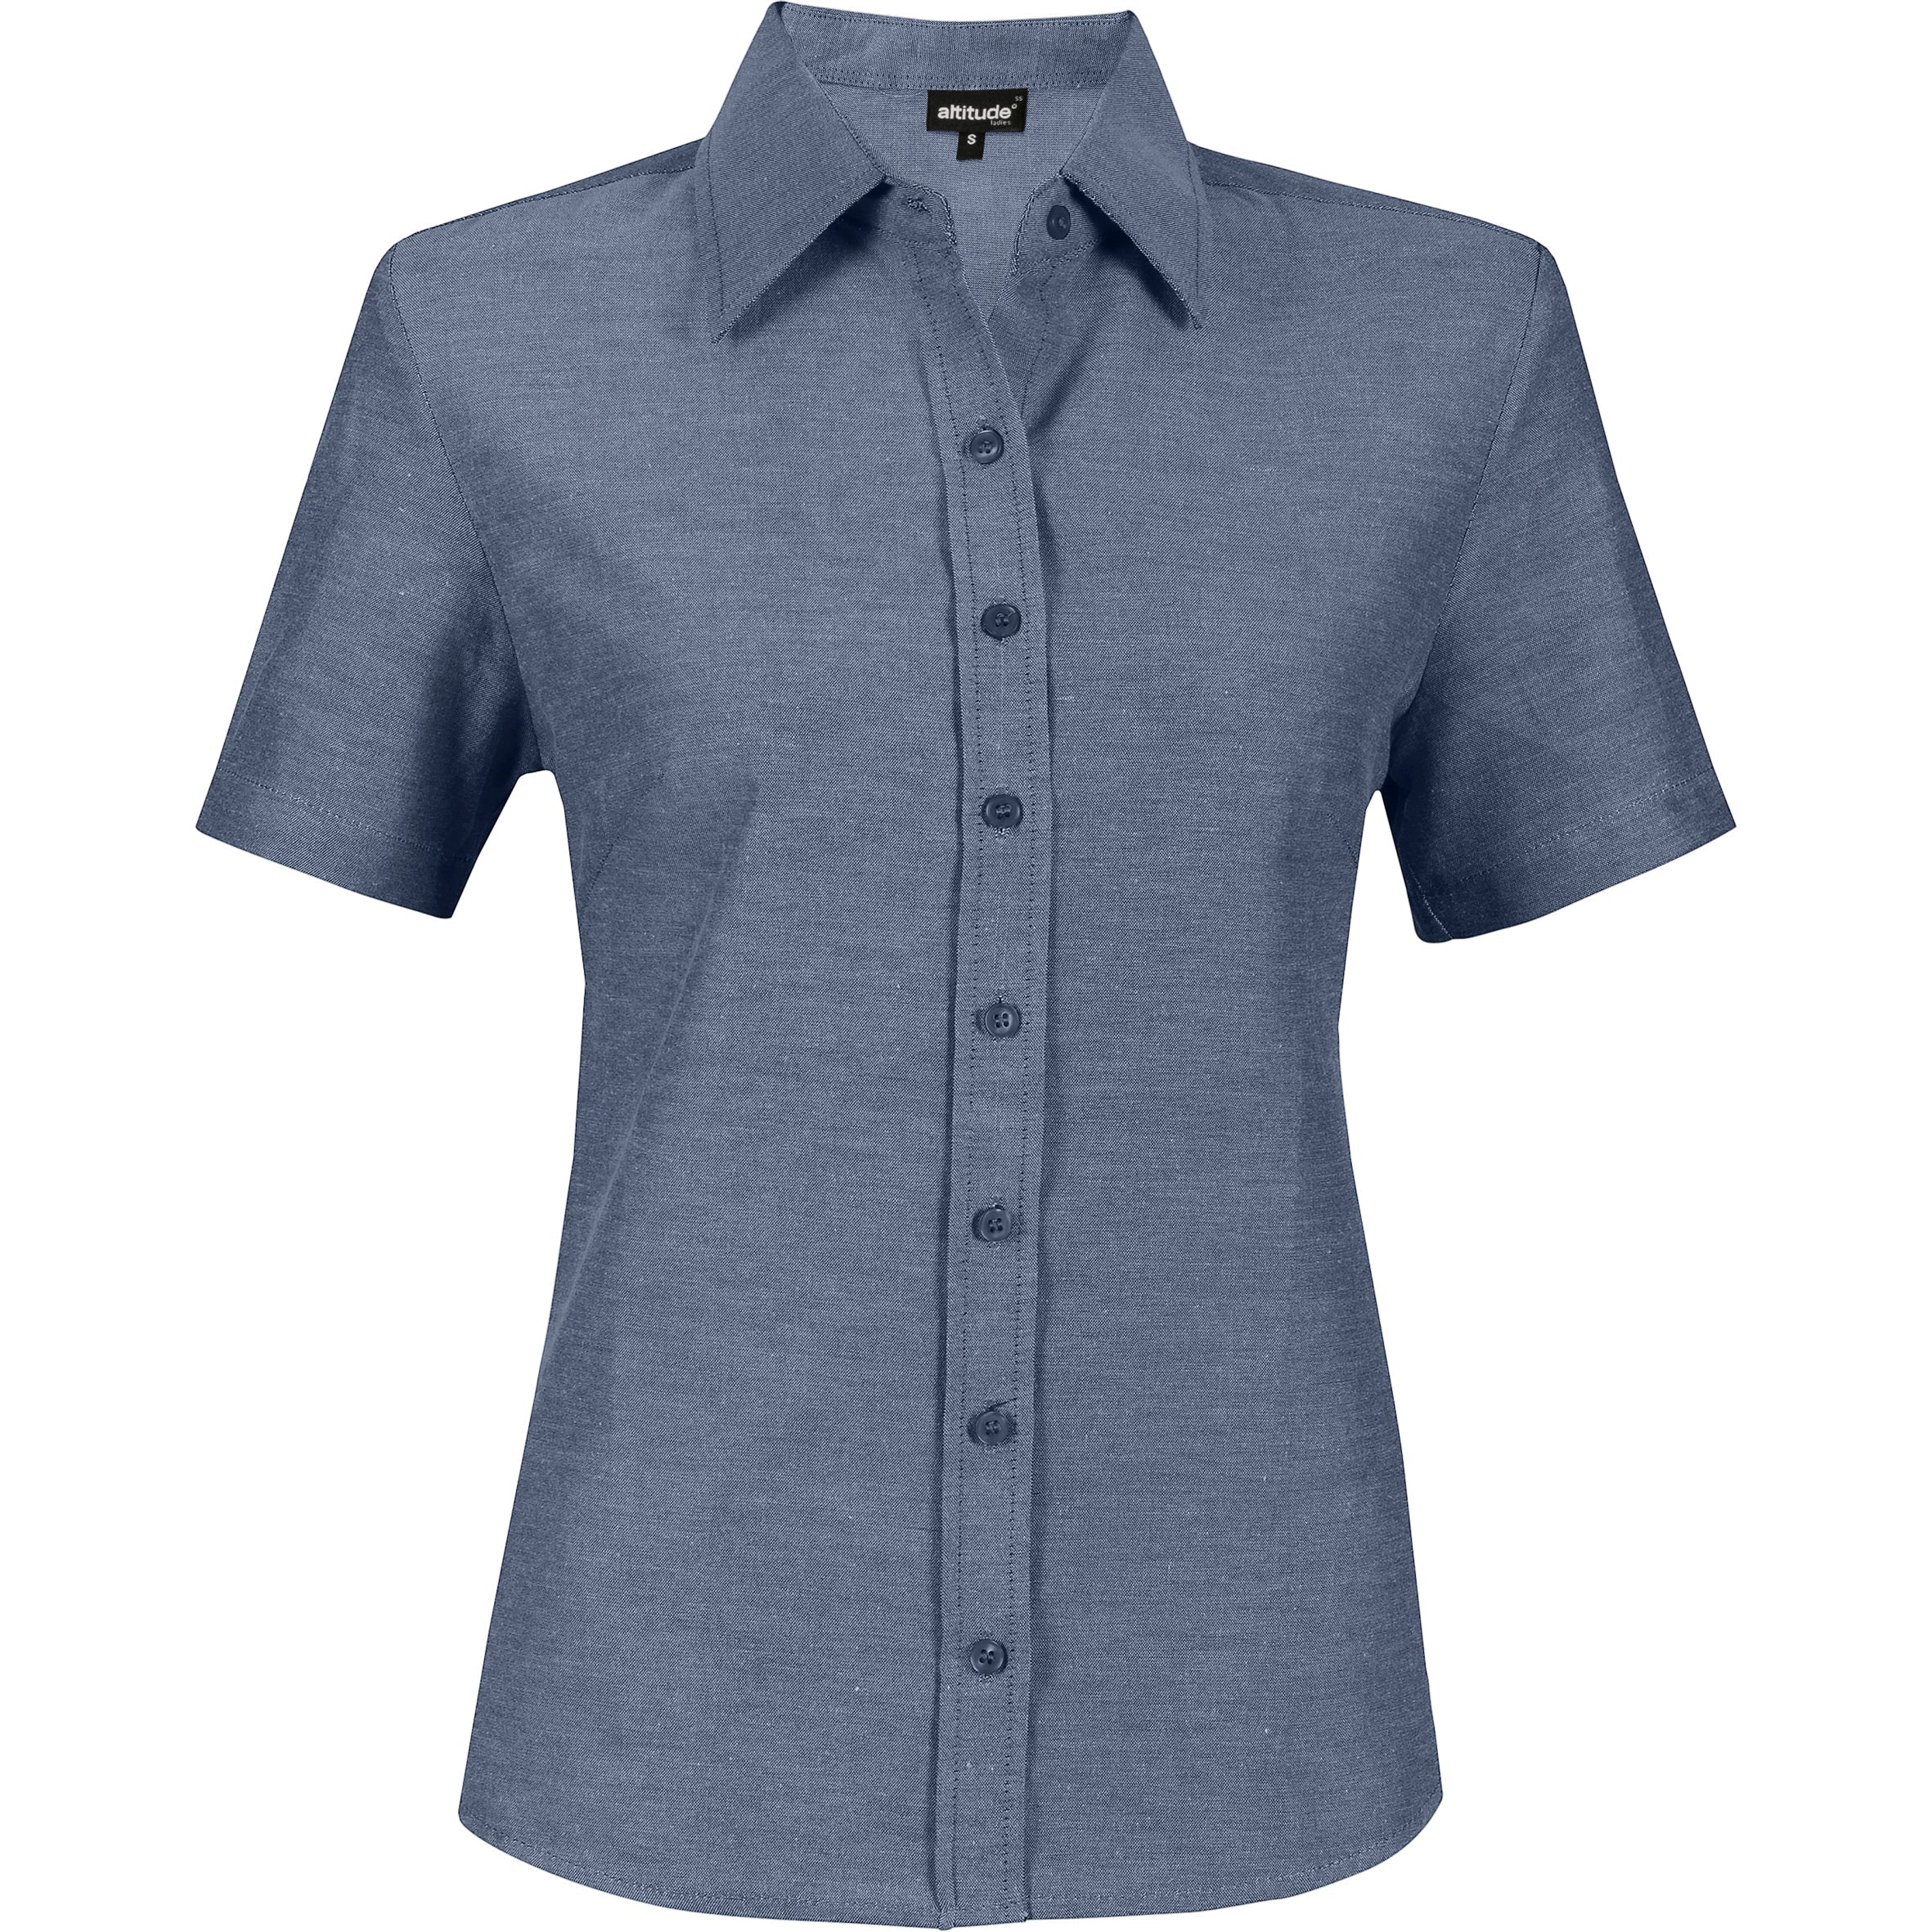 Ladies Short Sleeve Oxford Shirt - White Only-